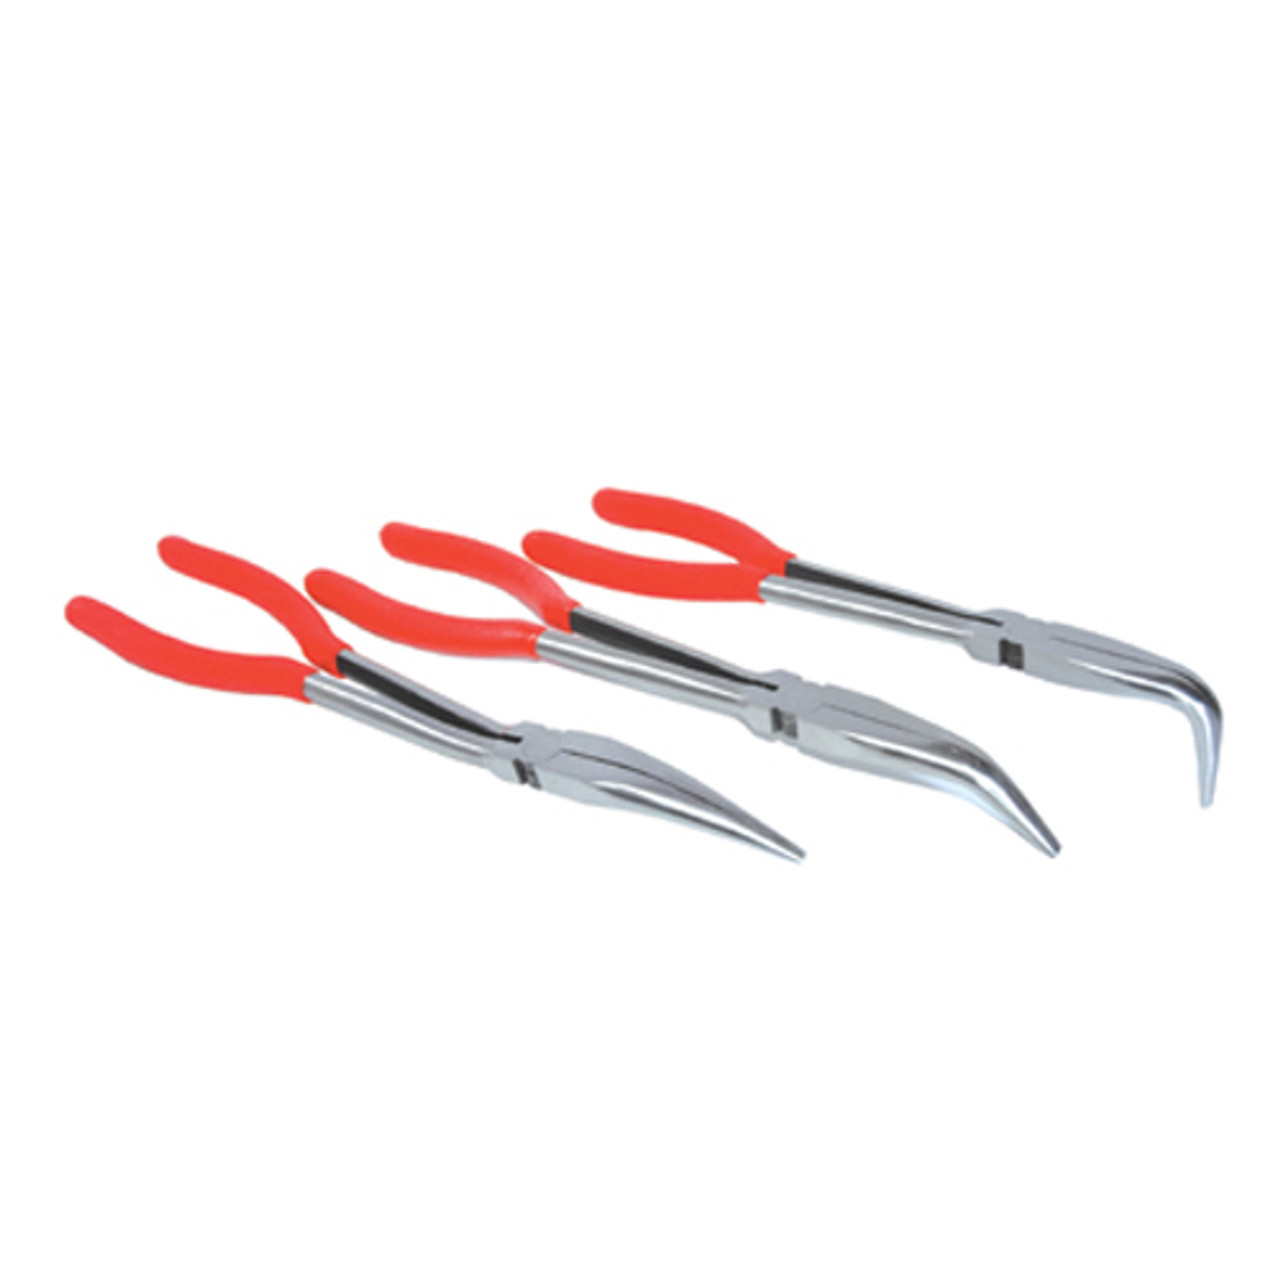 Knipex Needle-Nose 45 Angled Pliers